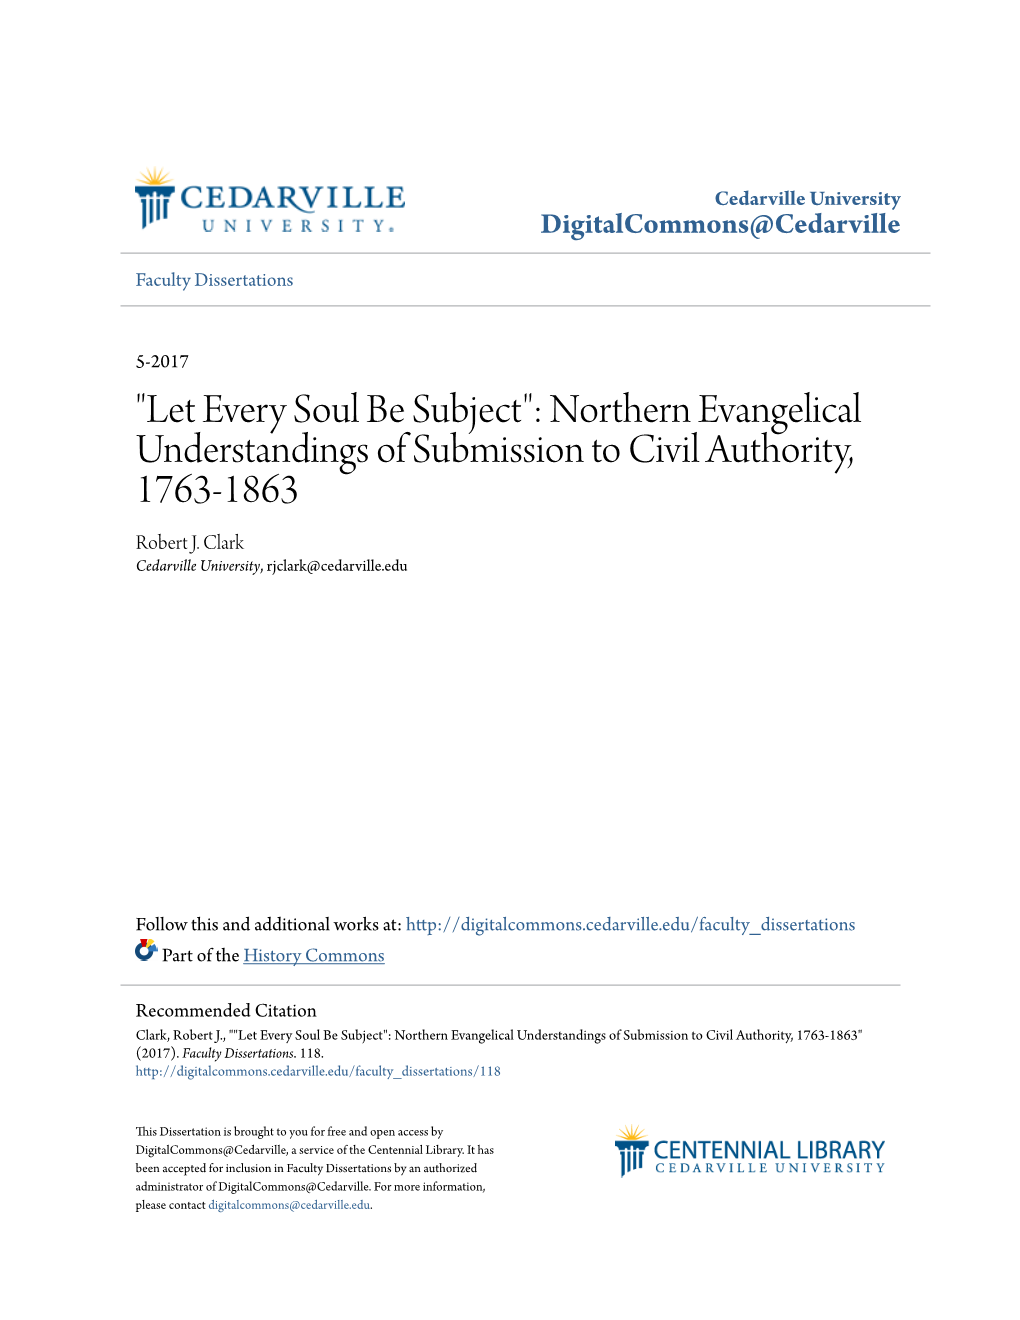 Northern Evangelical Understandings of Submission to Civil Authority, 1763-1863 Robert J